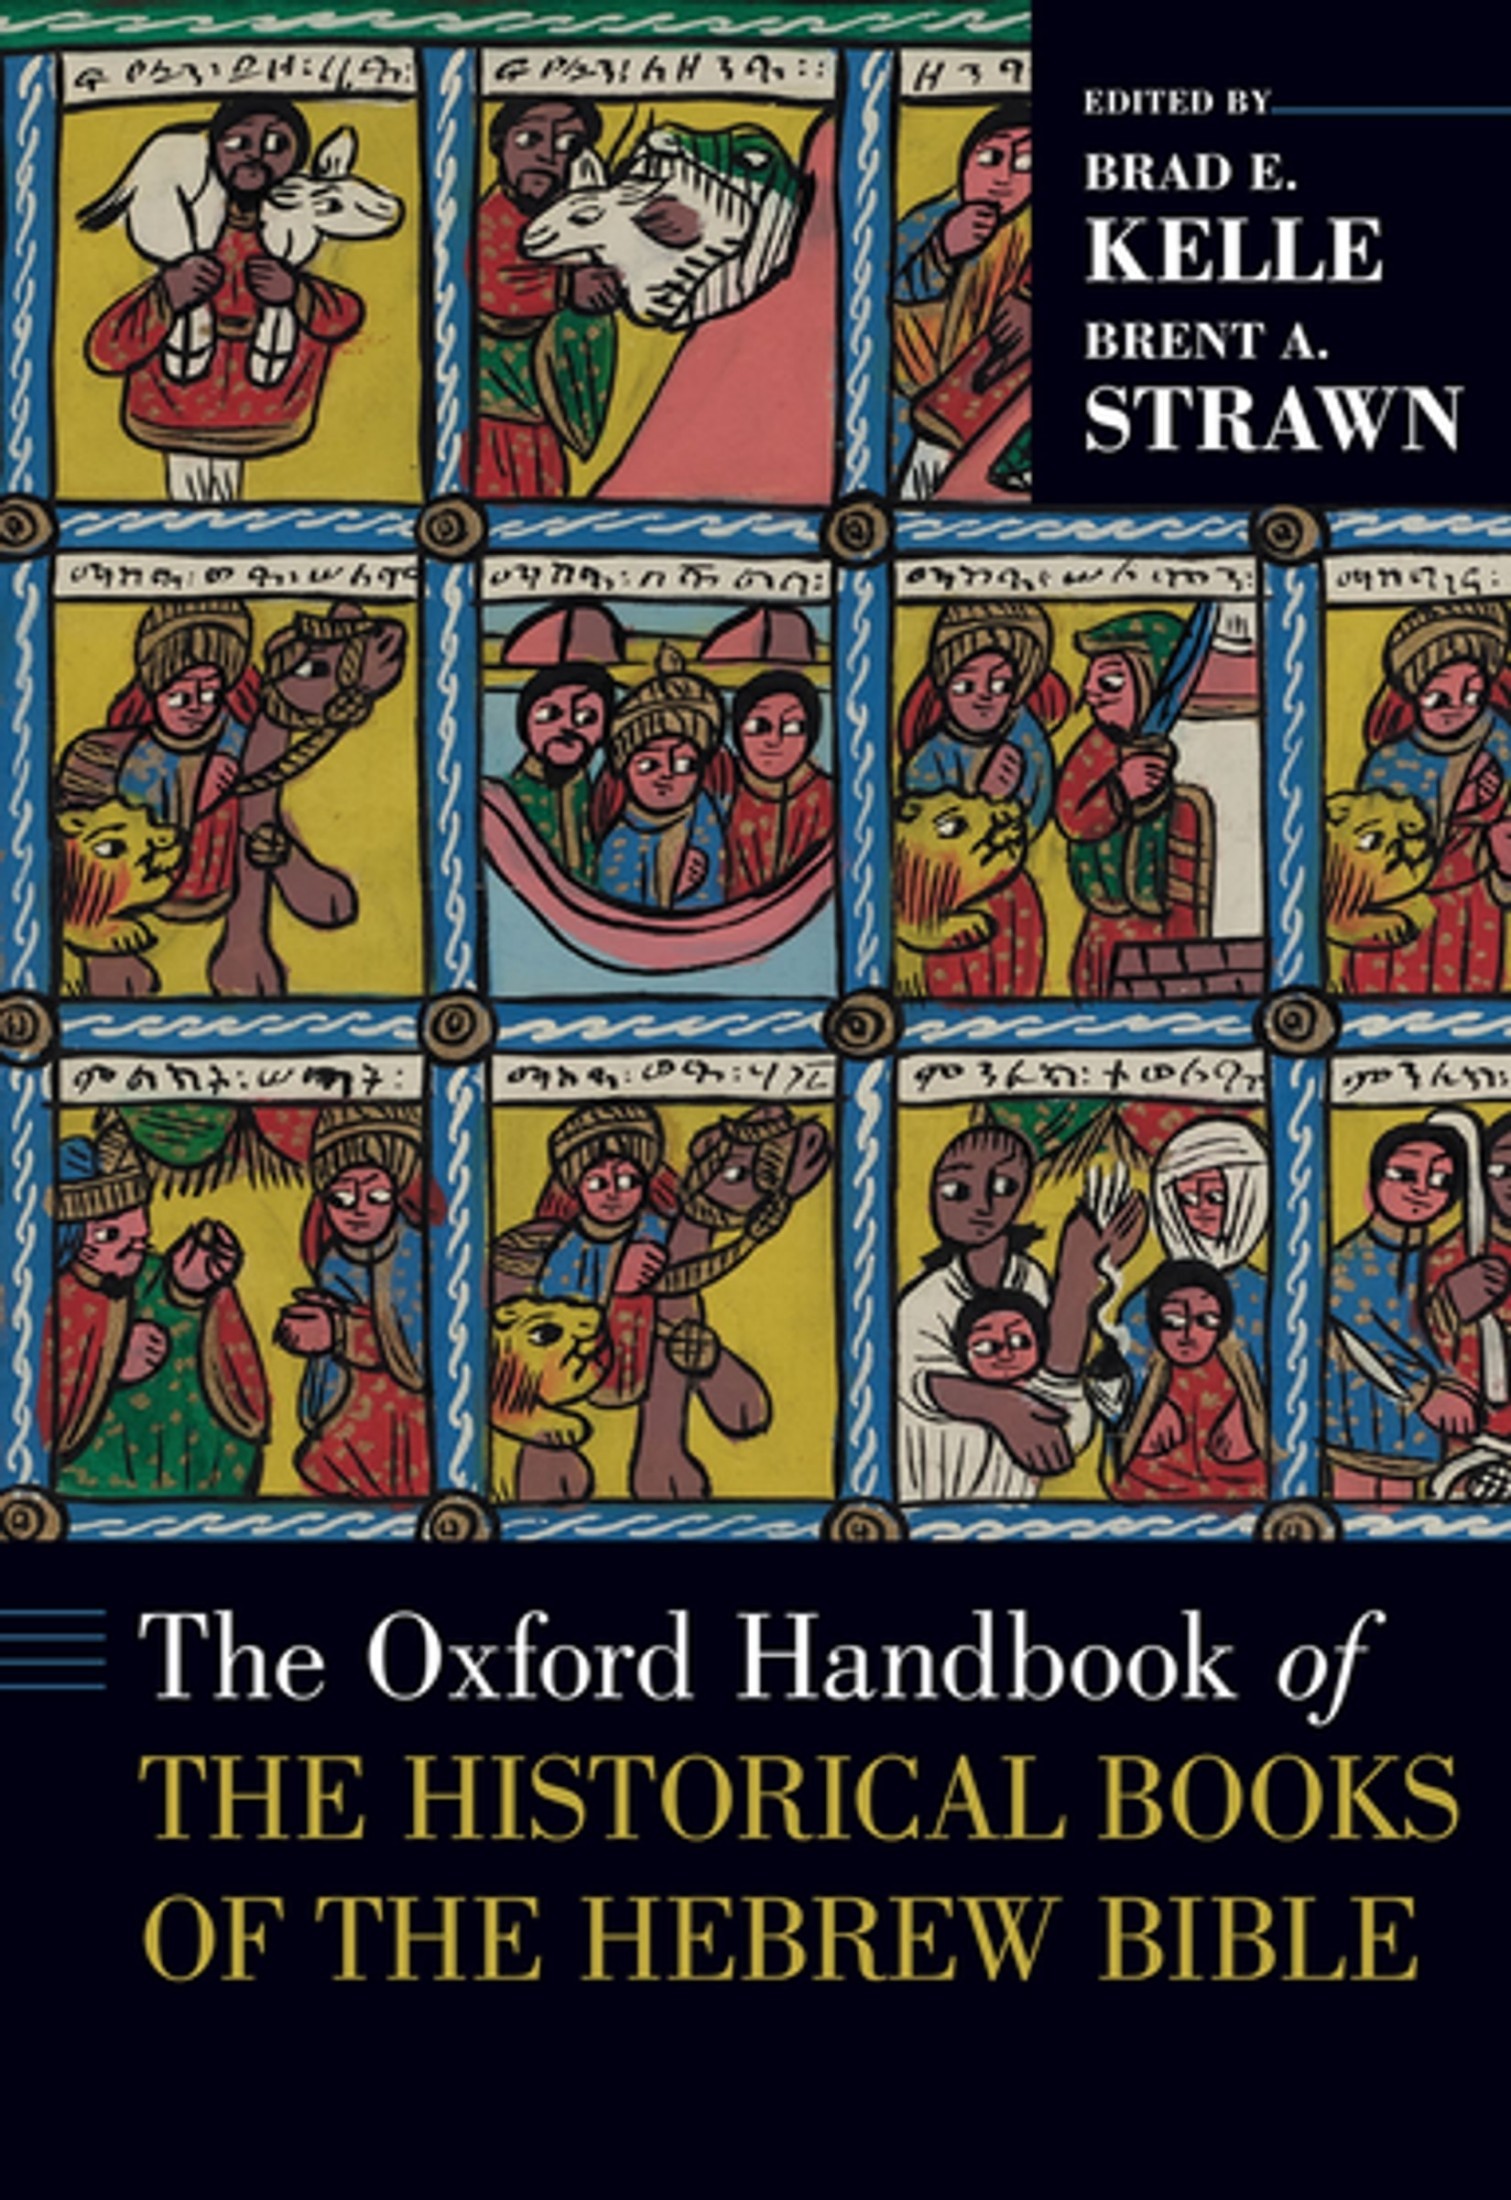 The Oxford Handbook of the Historical Books of the Hebrew Bible